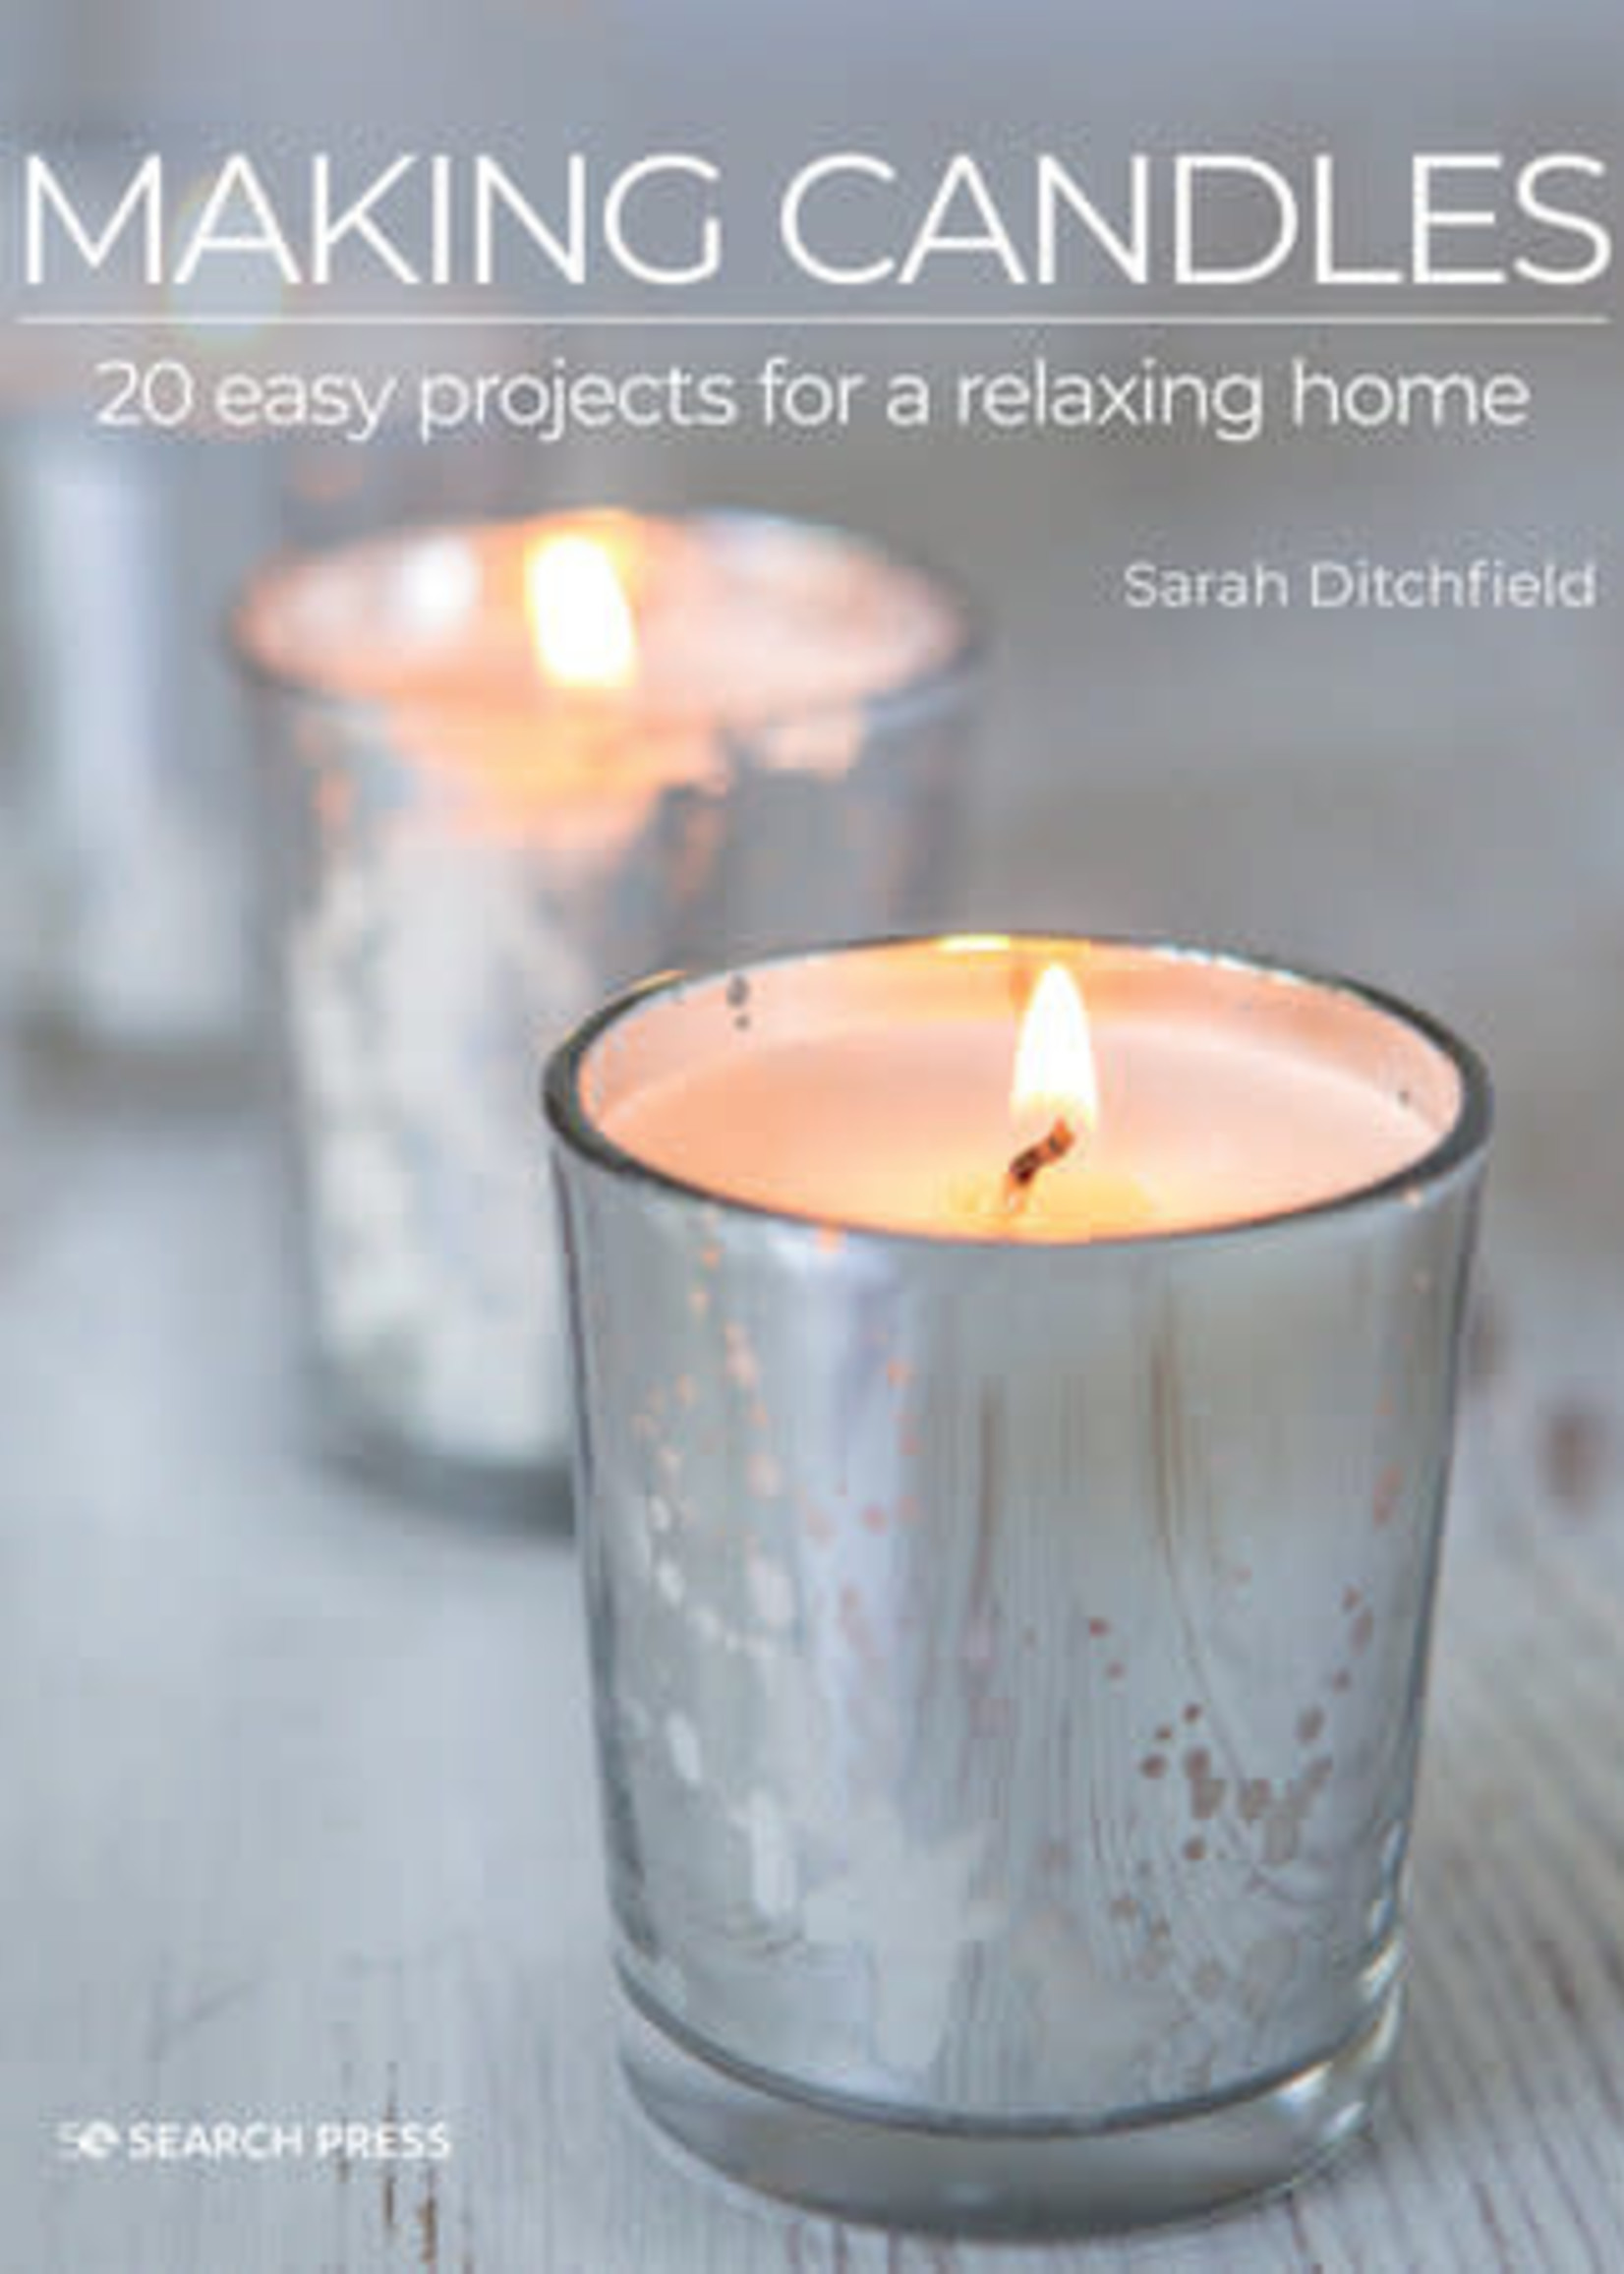 Making Candles: 20 Easy Projects for a Relaxing Home by Sarah Ditchfield